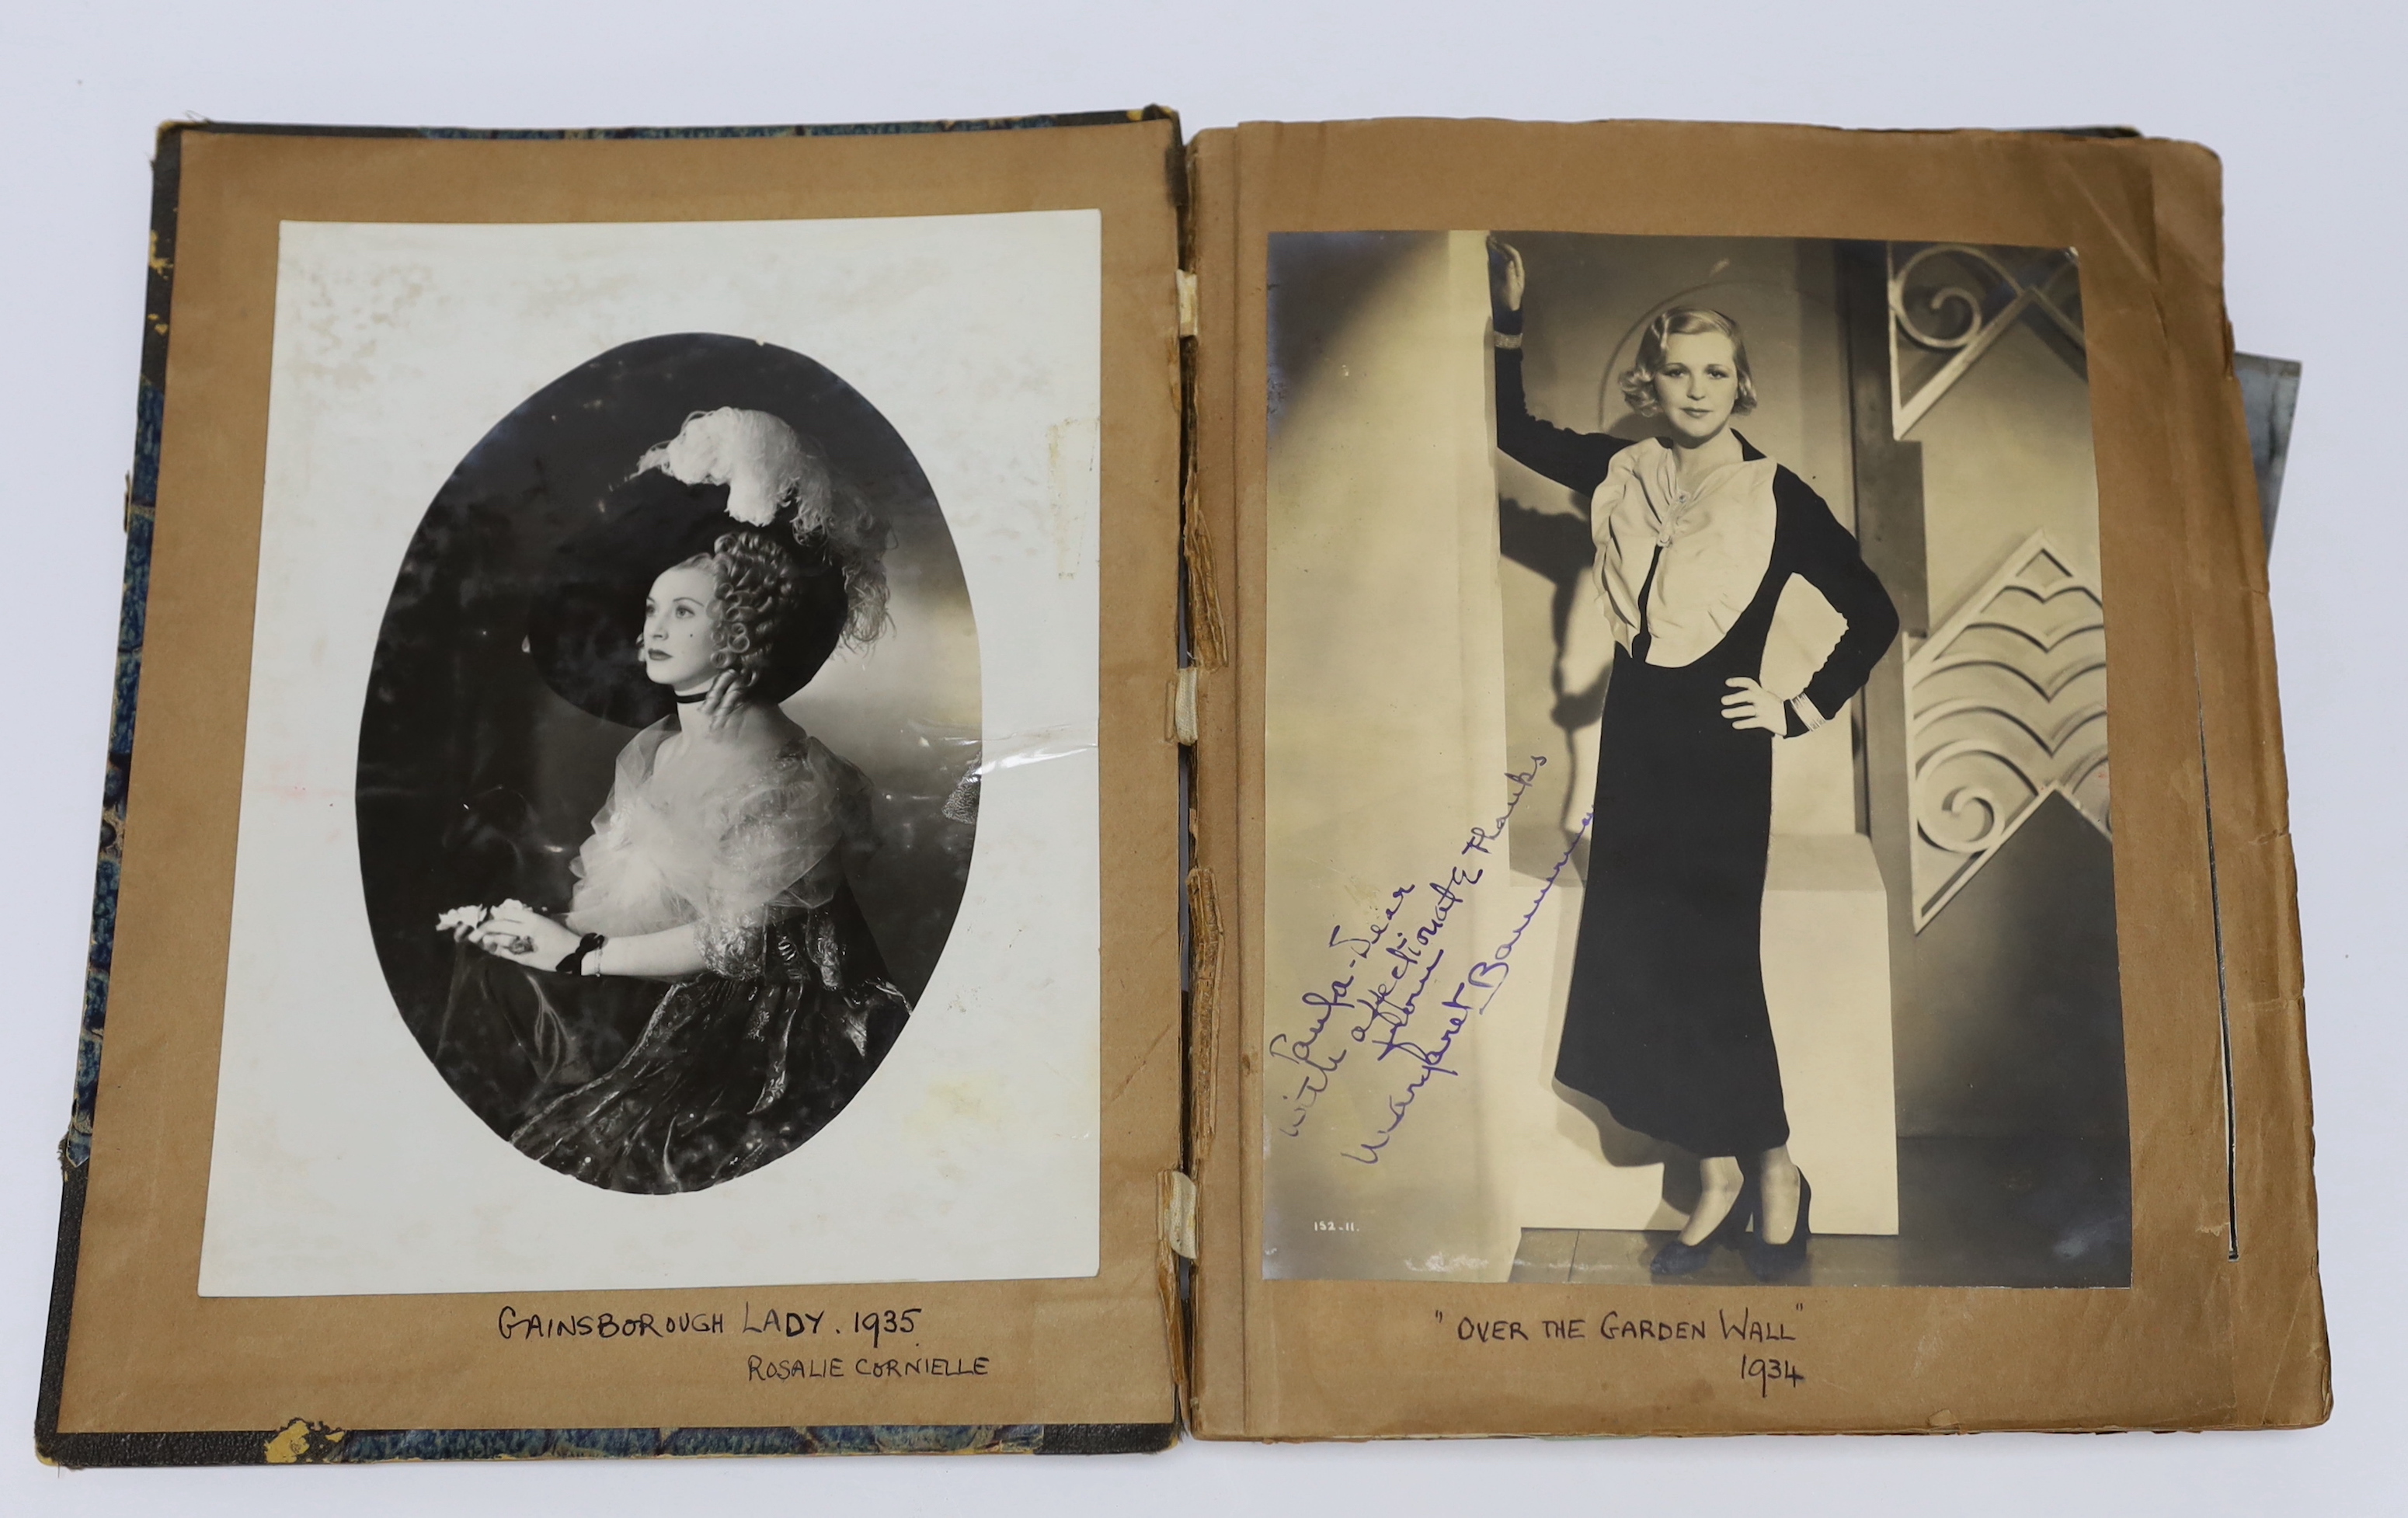 Paula Newman, Actress, costume designer and artist (1894-?) - An album of black and white photographs and newspaper cuttings, particularly covering her career as costume designer for films, including notes from Alfred Hi